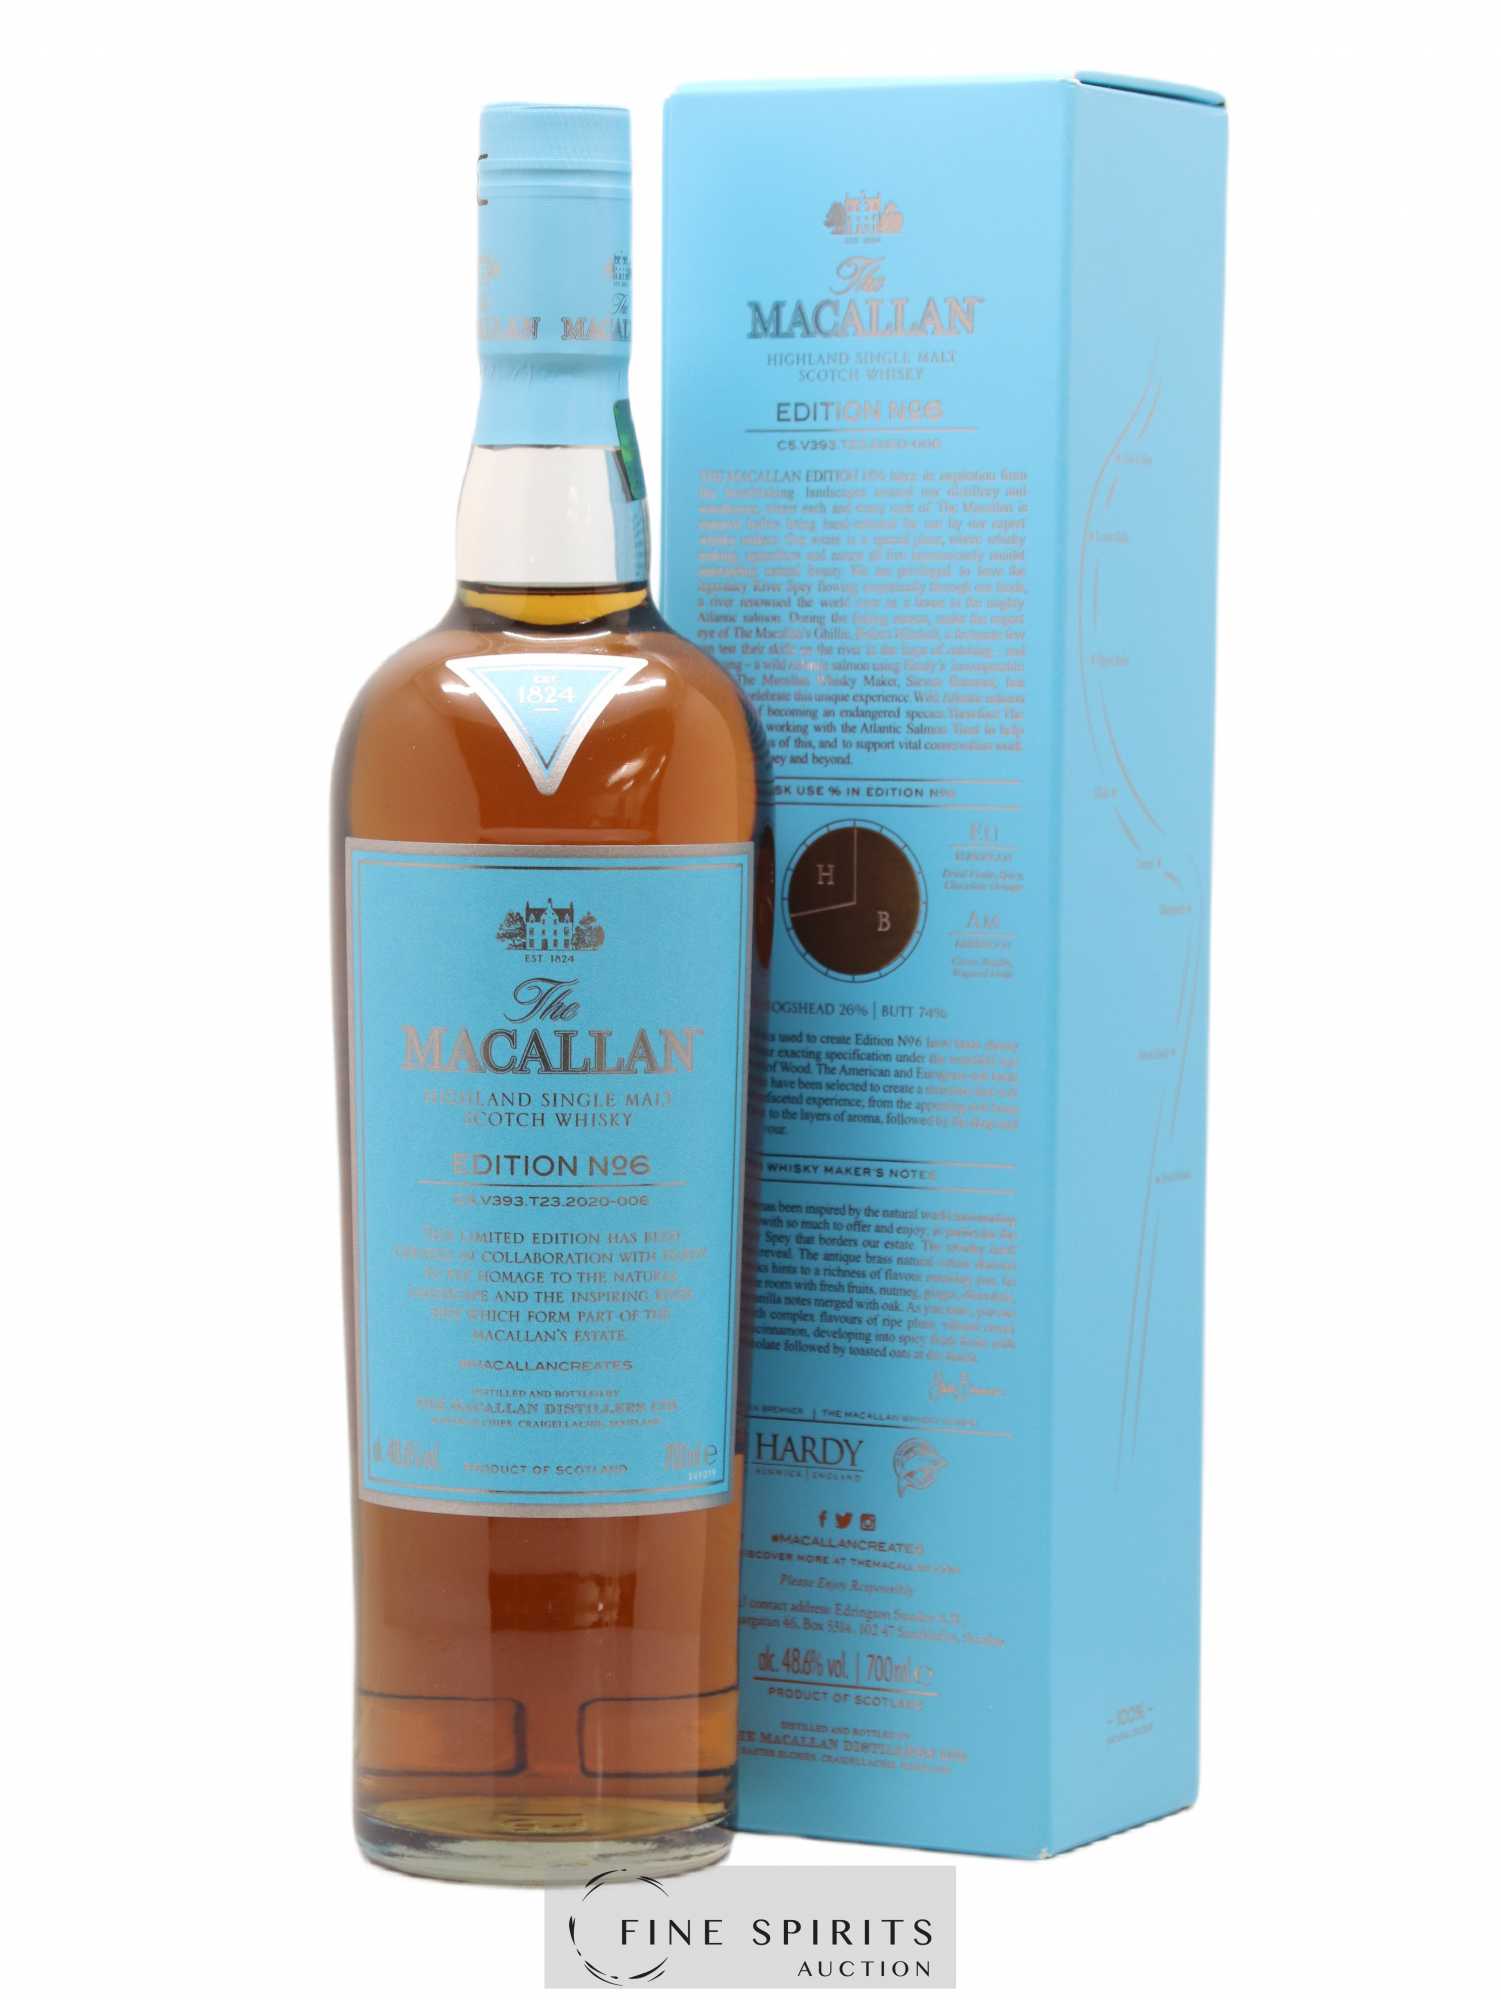 Macallan (The) Of. Edition n°6 C5.V393.T23.2020-006 Limited Edition